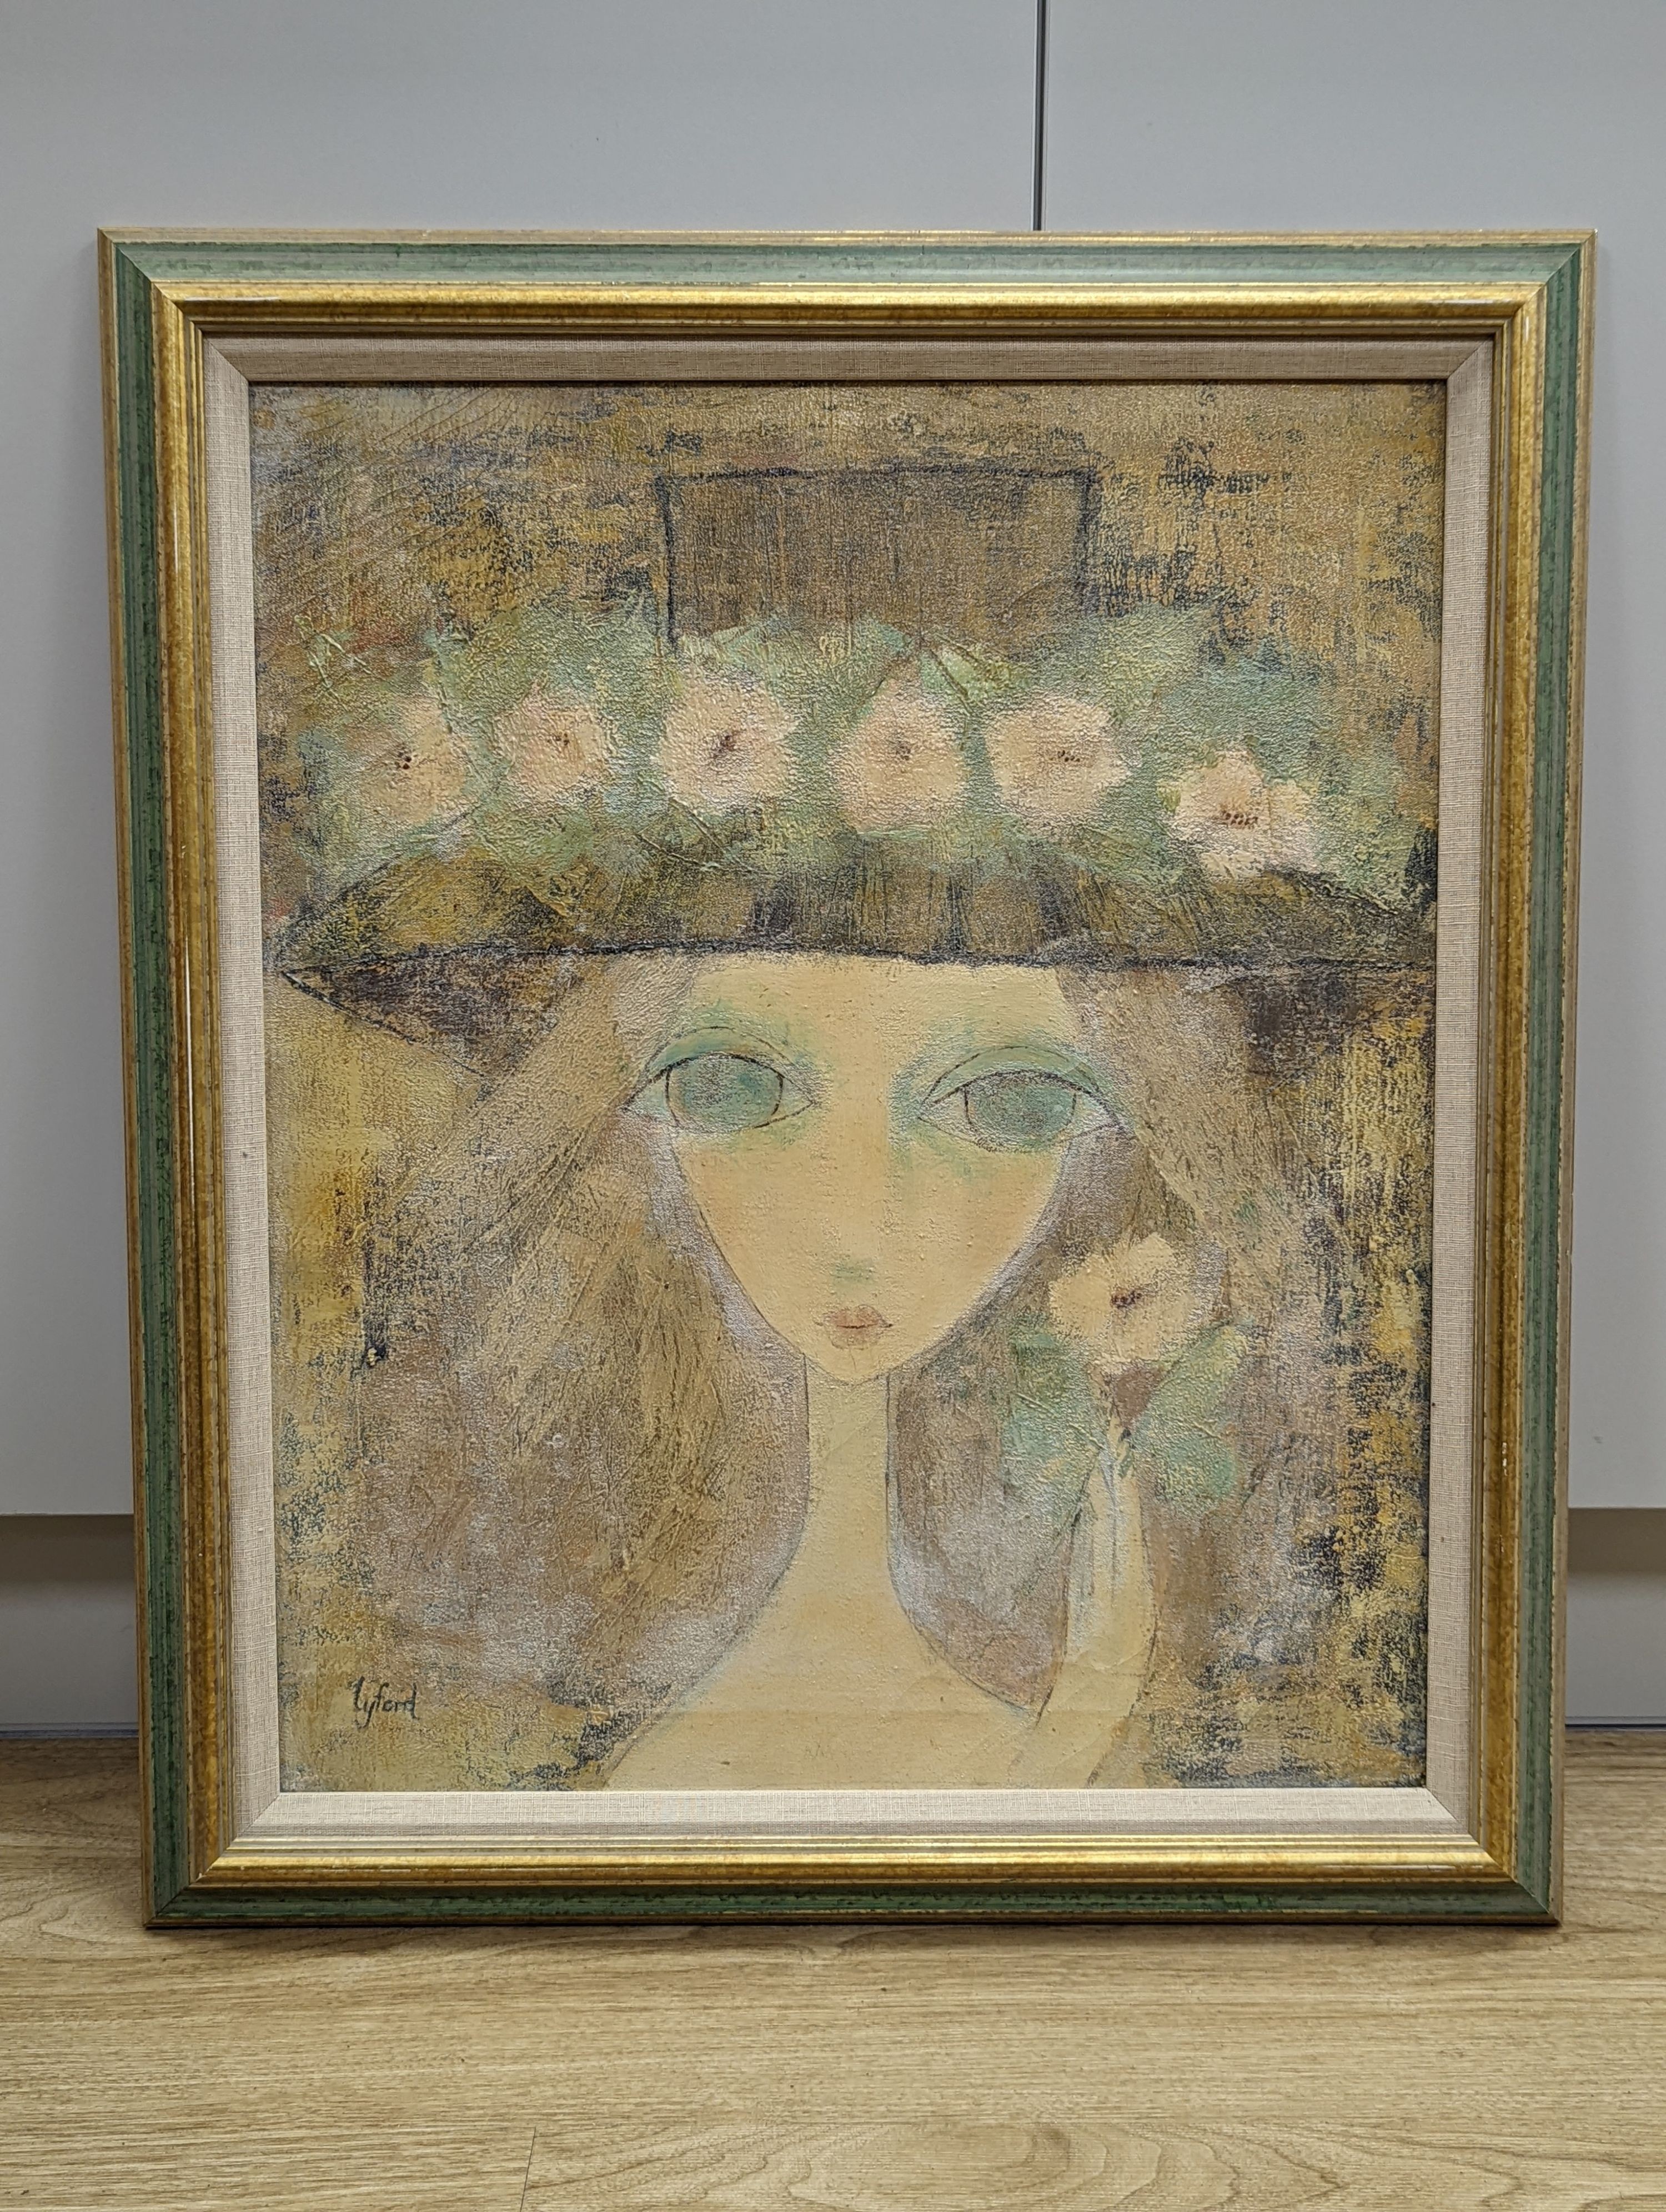 Philip Lyford (1887-1950), oil on canvas, Portrait of a girl wearing a wide brimmed bonnet, oil on canvas, signed, 60 x 50cm